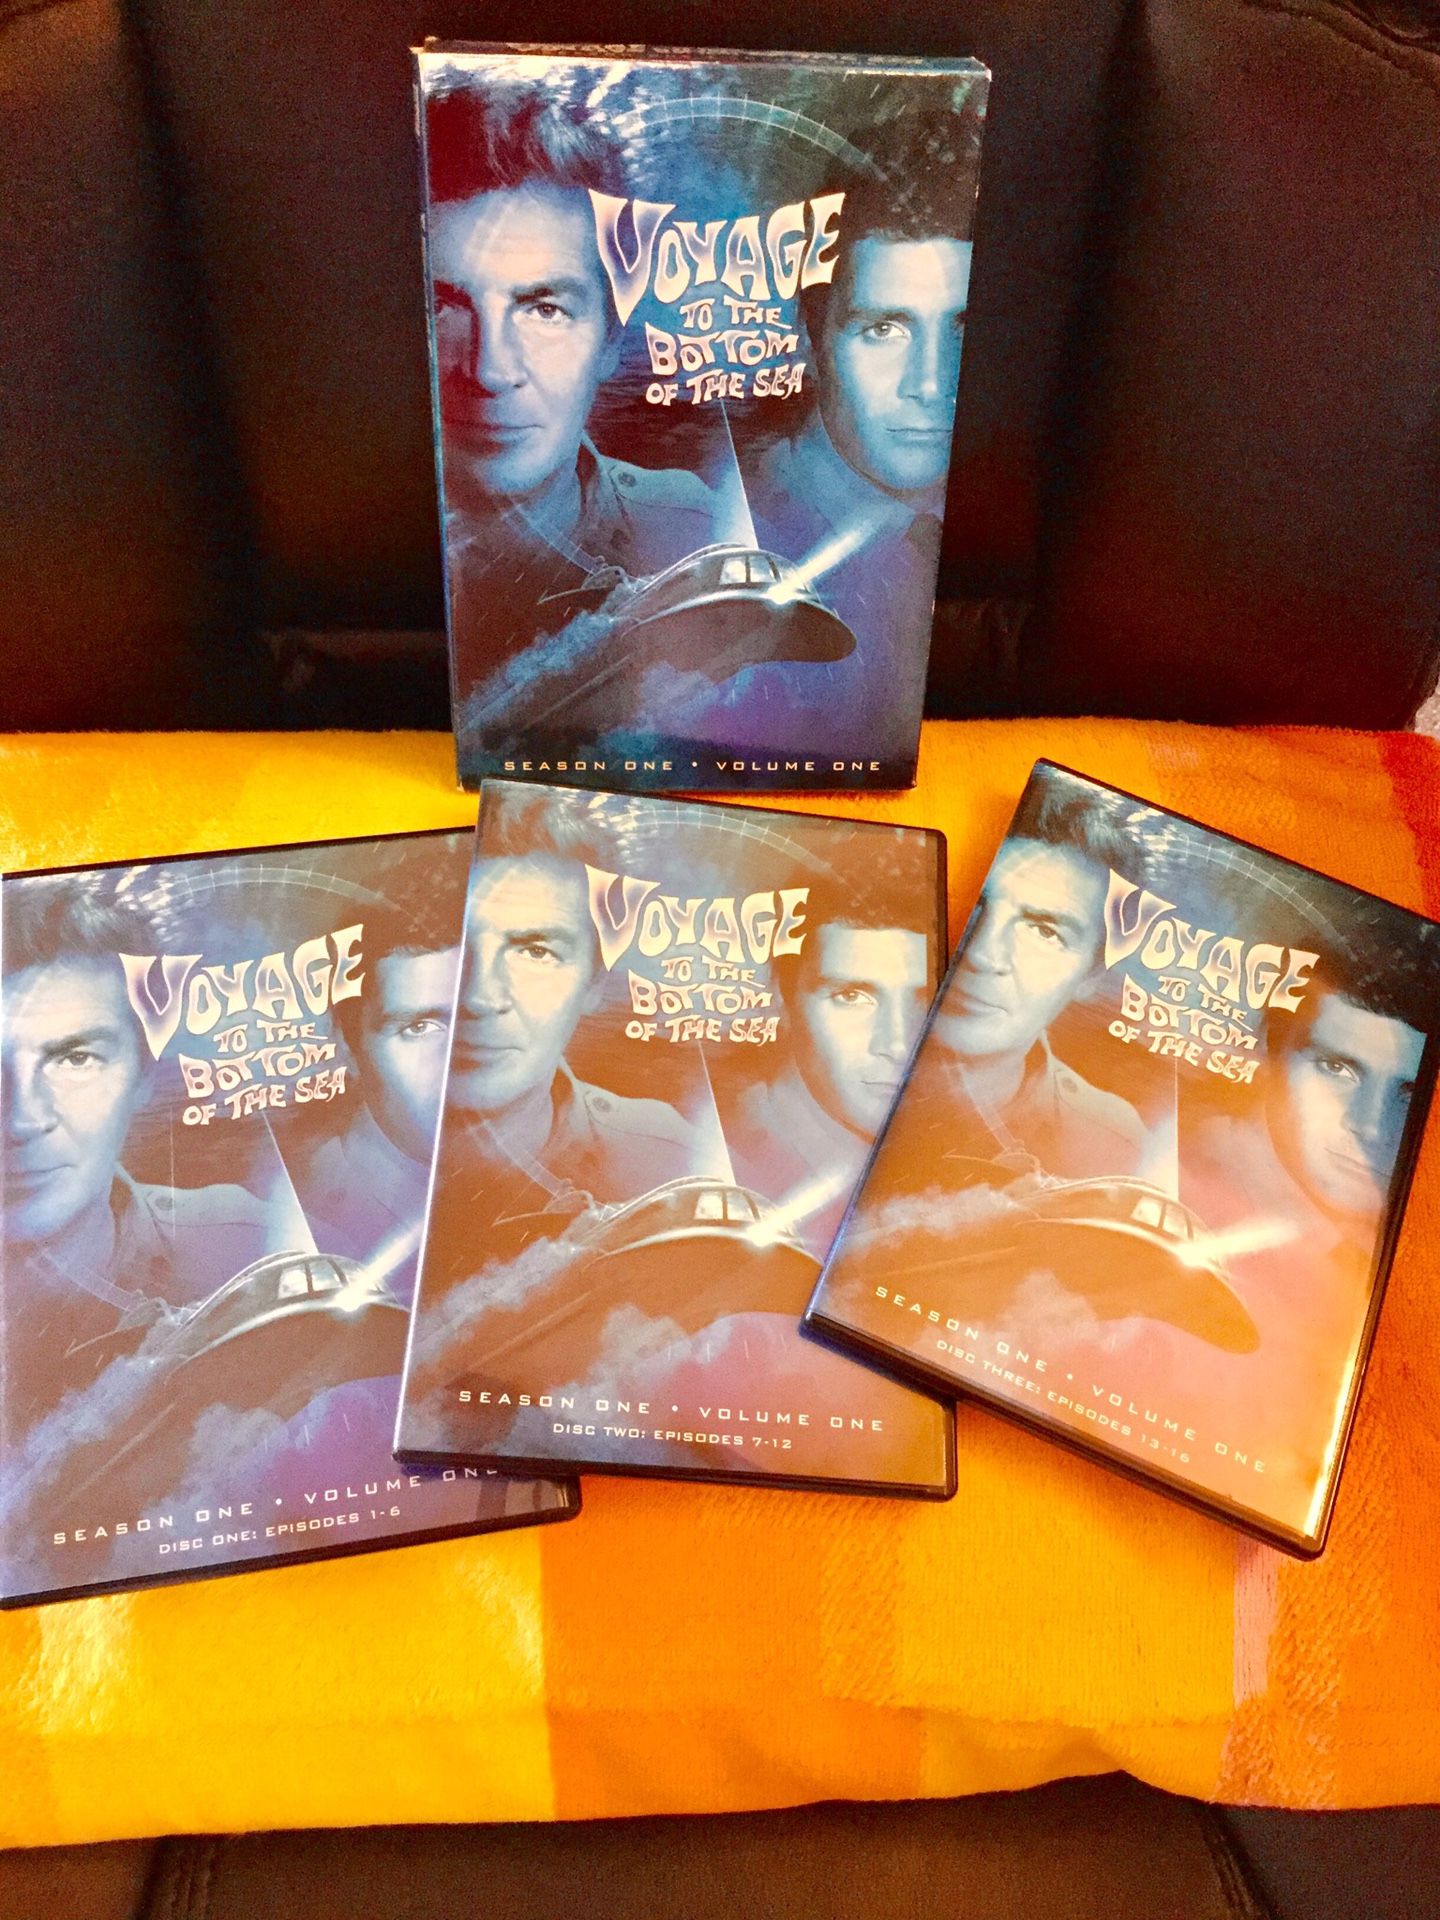 3 Adventure MOVIE DVD / Voyage to the bottom of the Sea * Season One includes 3 DVD 📀📀📀 😁👍